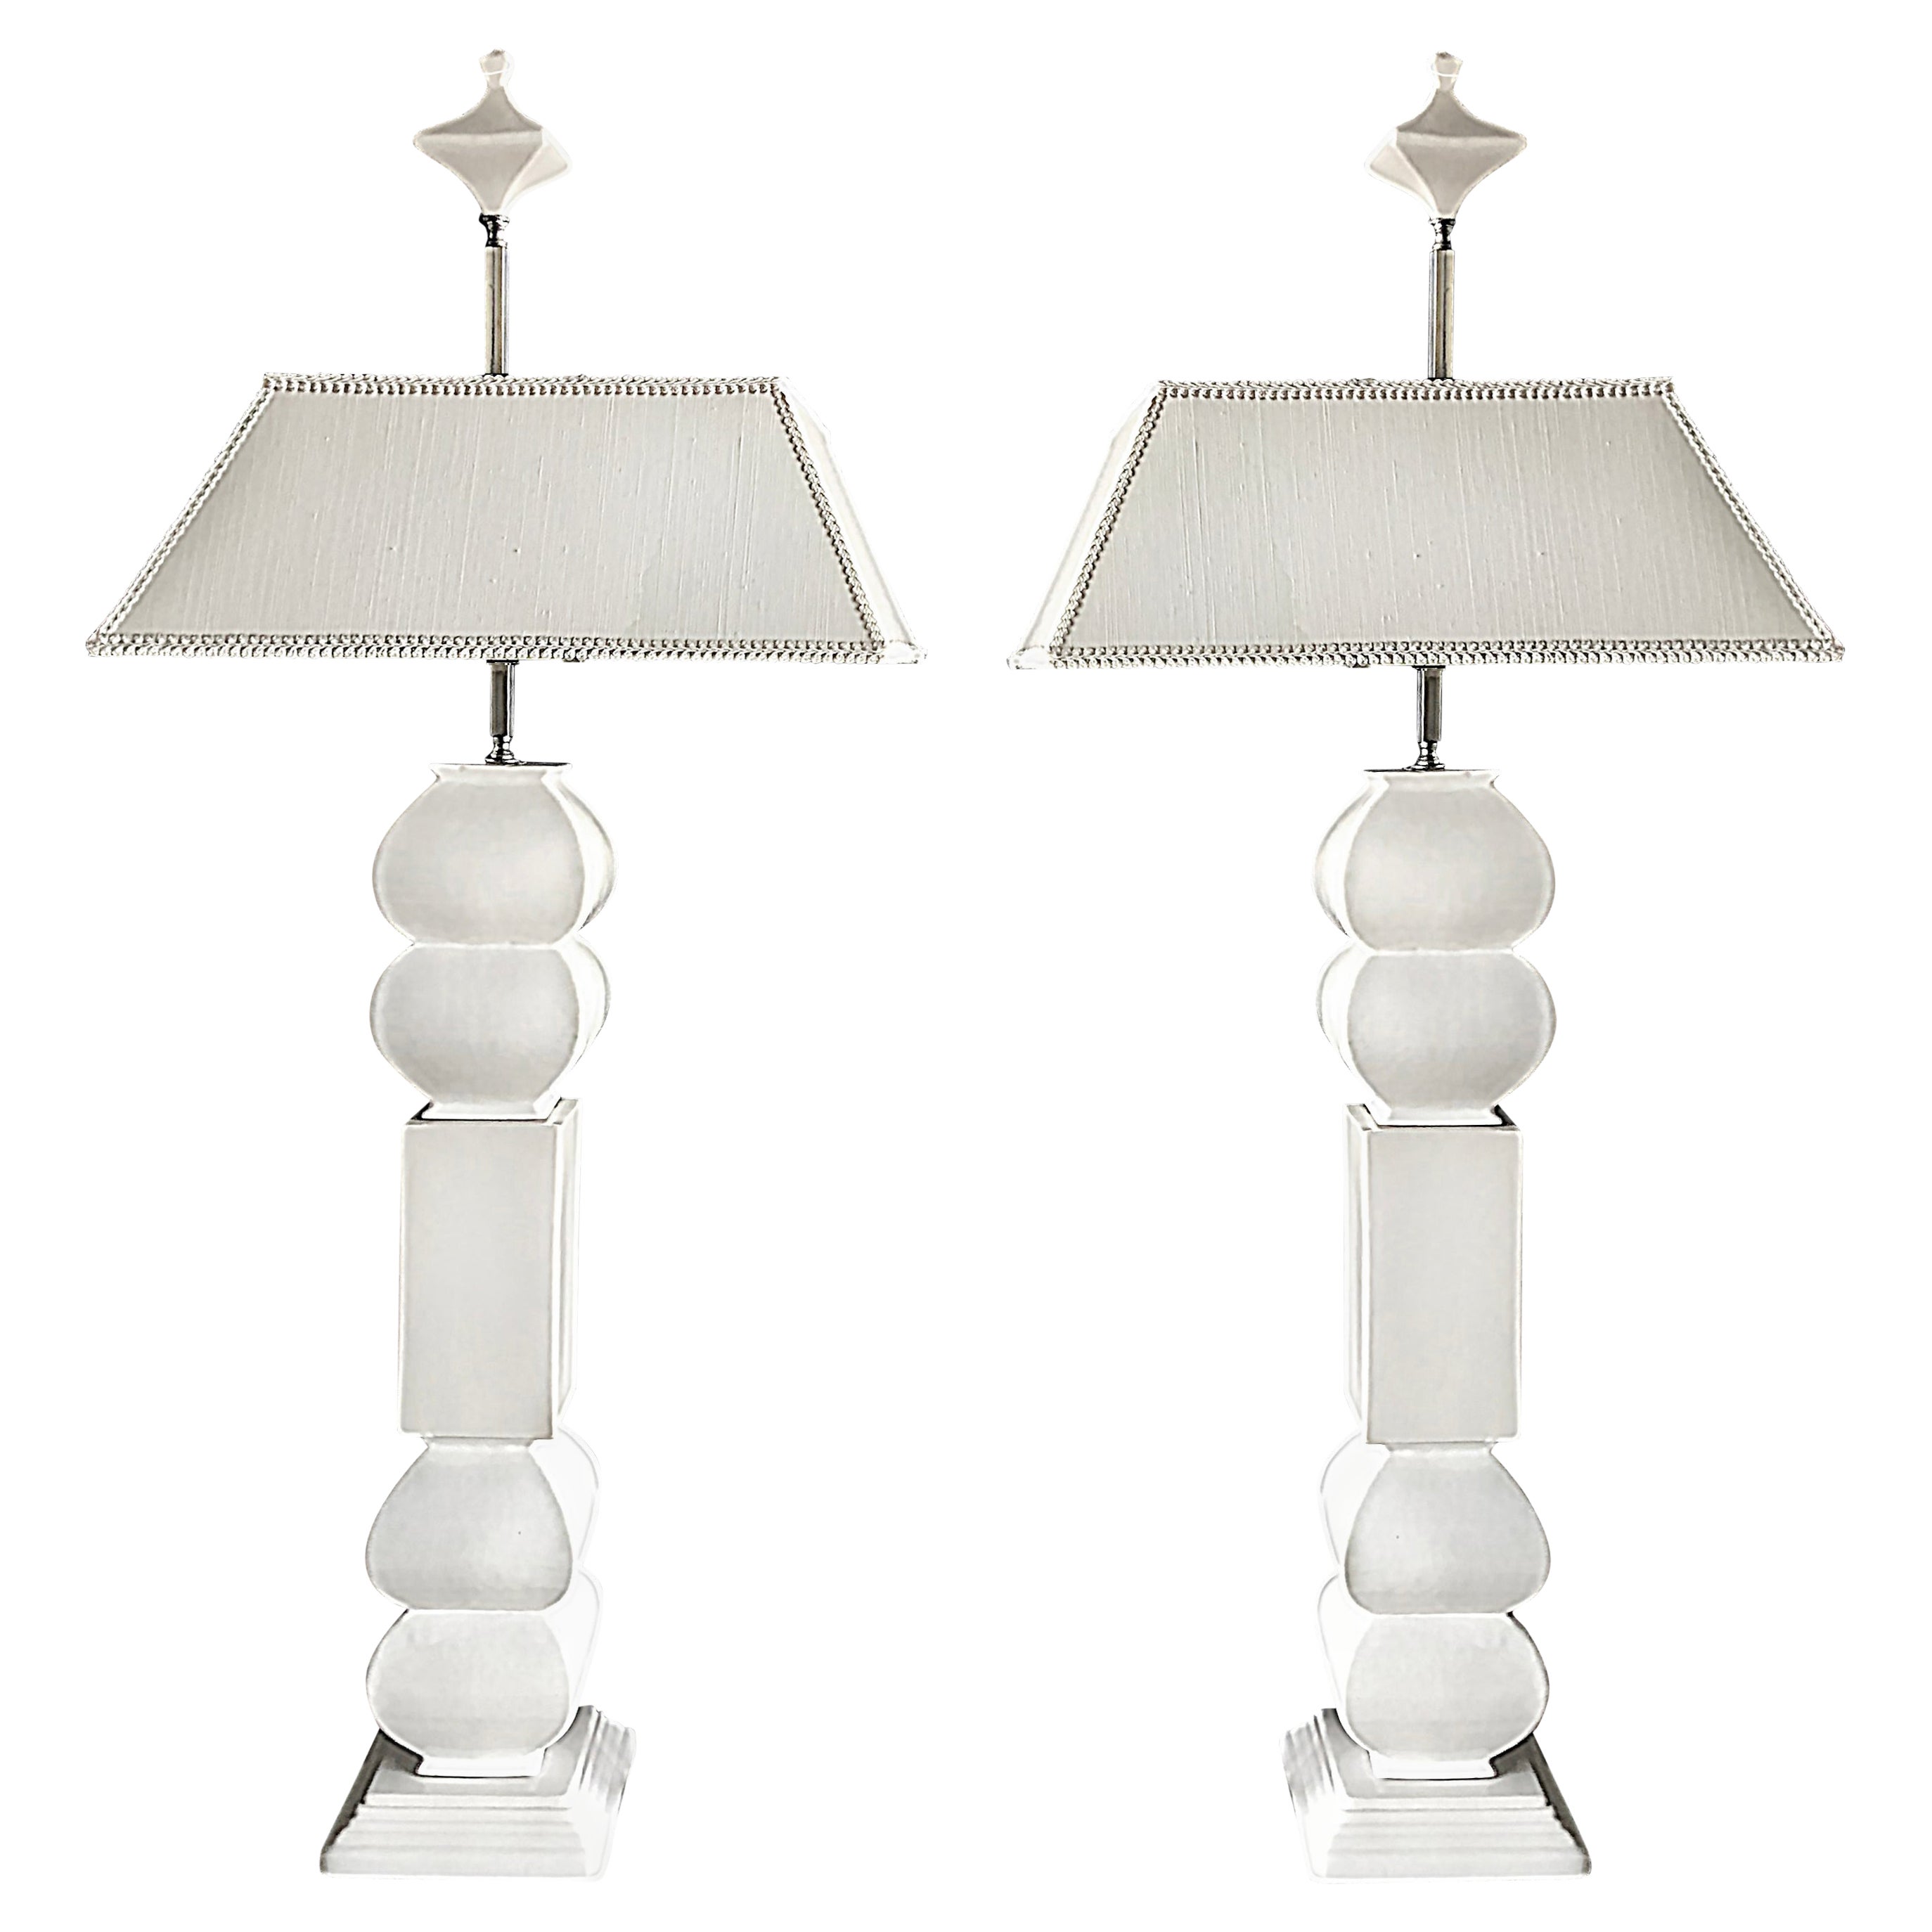 Hollywood Regency Overscale Ceramic Table Lamps, Pair